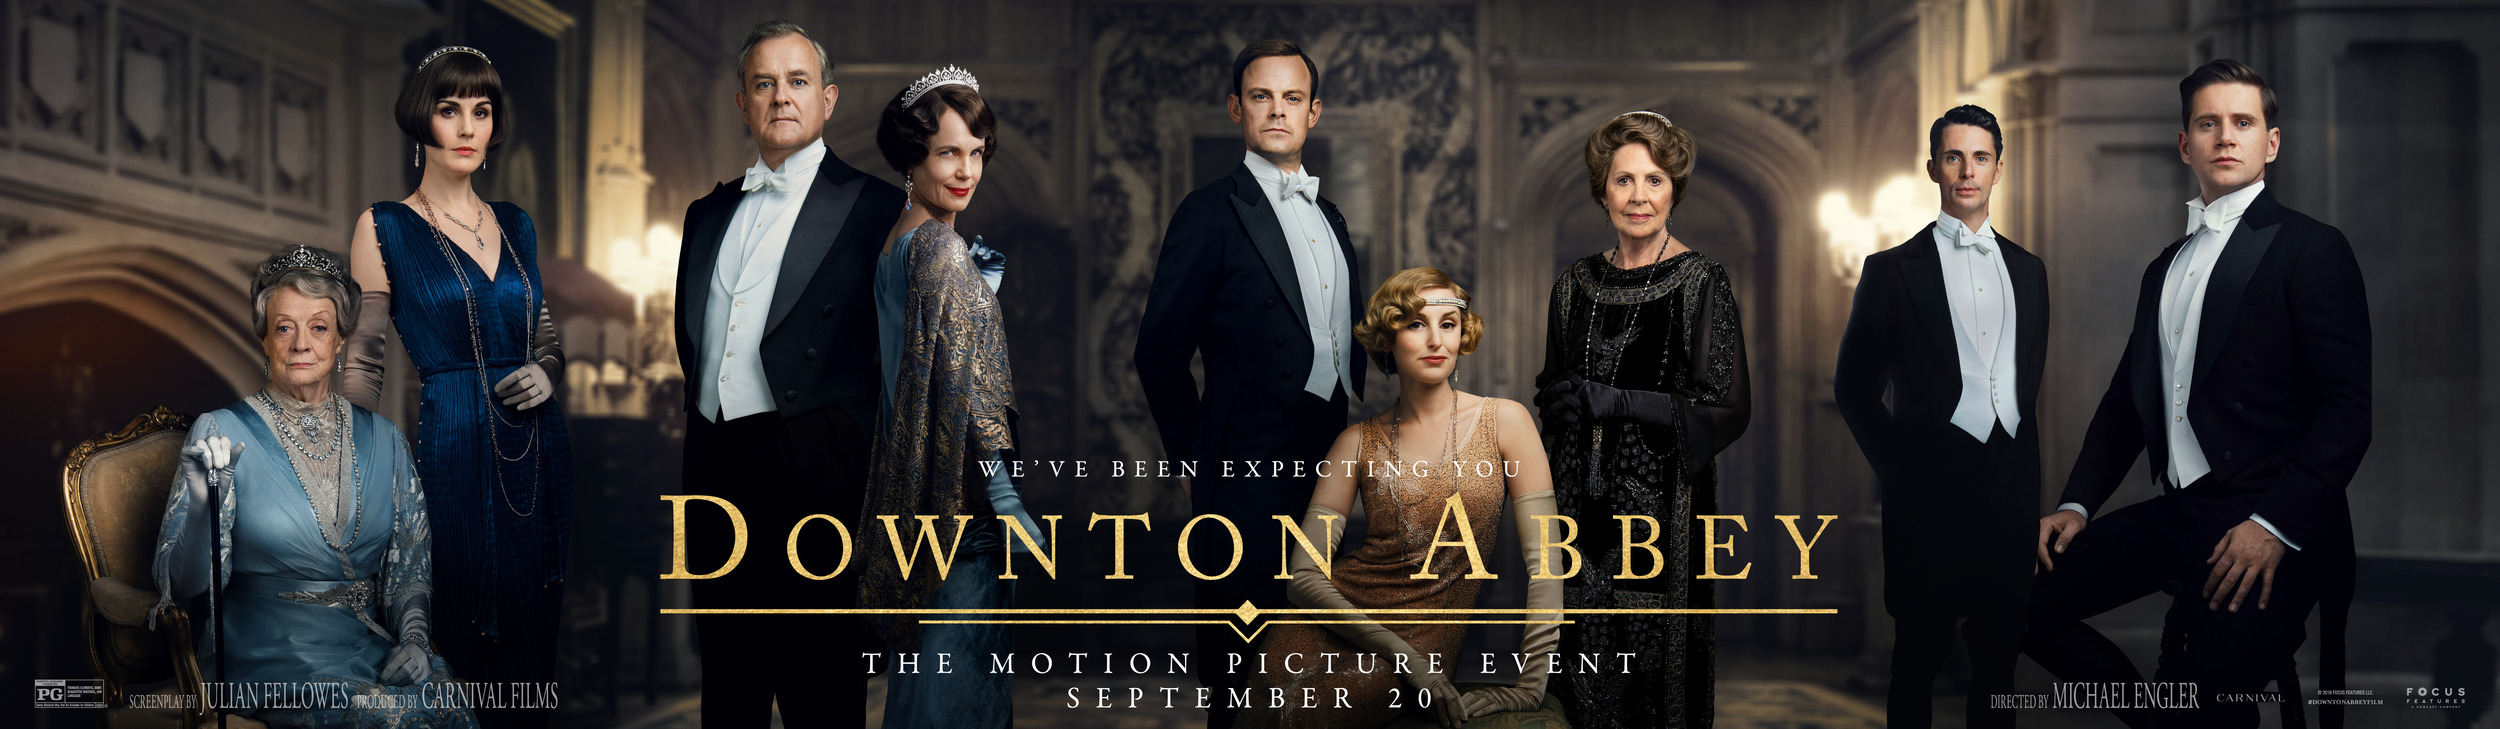 Mega Sized Movie Poster Image for Downton Abbey (#28 of 32)